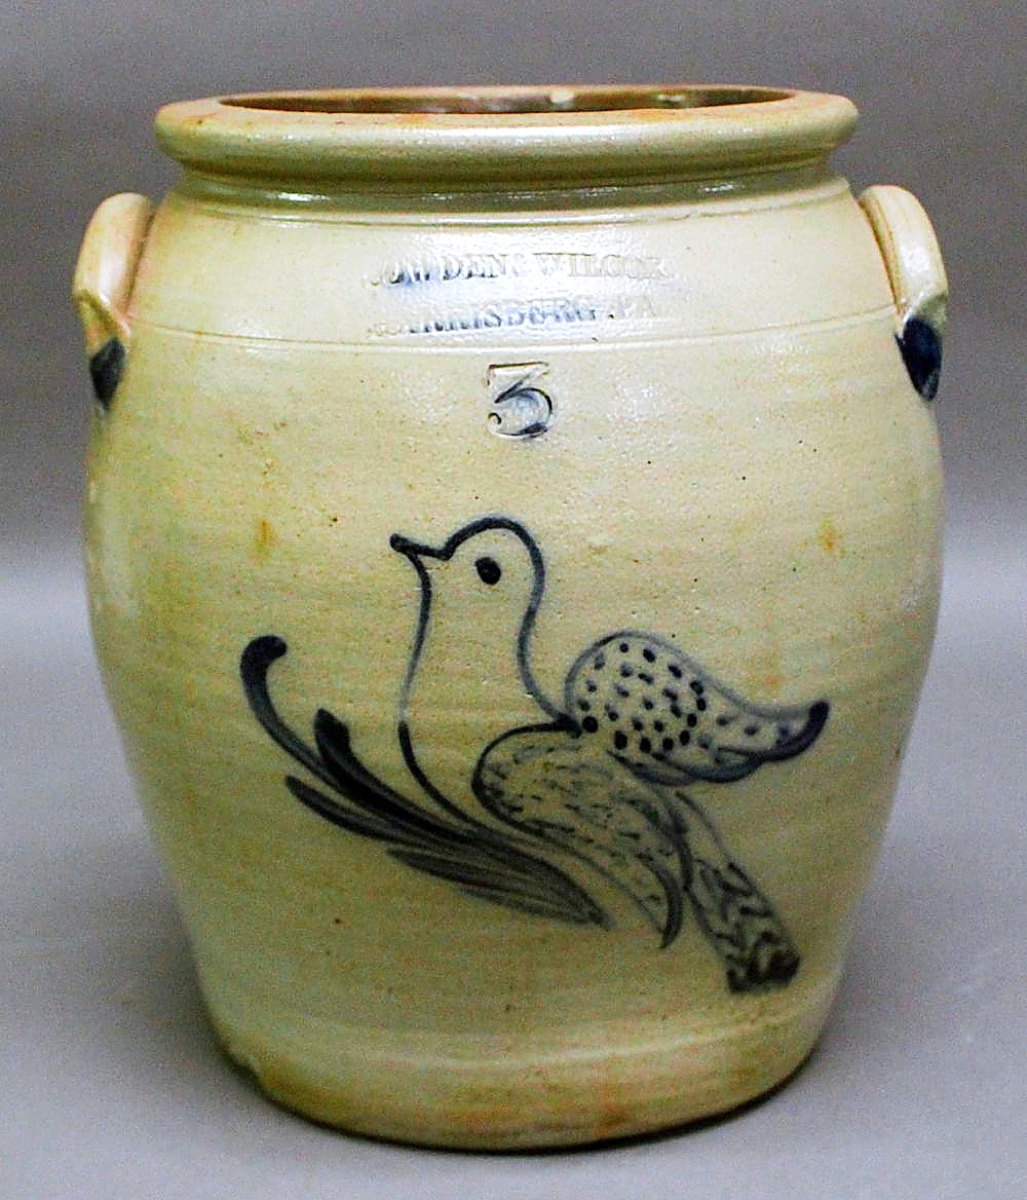 The highest price realized for one of nearly a dozen lots of Cowden & Wilcox cobalt-decorated stoneware was $8,120 for this 3-gallon semi-ovoid jar with winged dove decoration. It sold to a Southern Pennsylvania buyer. According to the catalog, the piece was published in Matthew R. Miller’s 2001 book, Decorated Stoneware of Cowden.